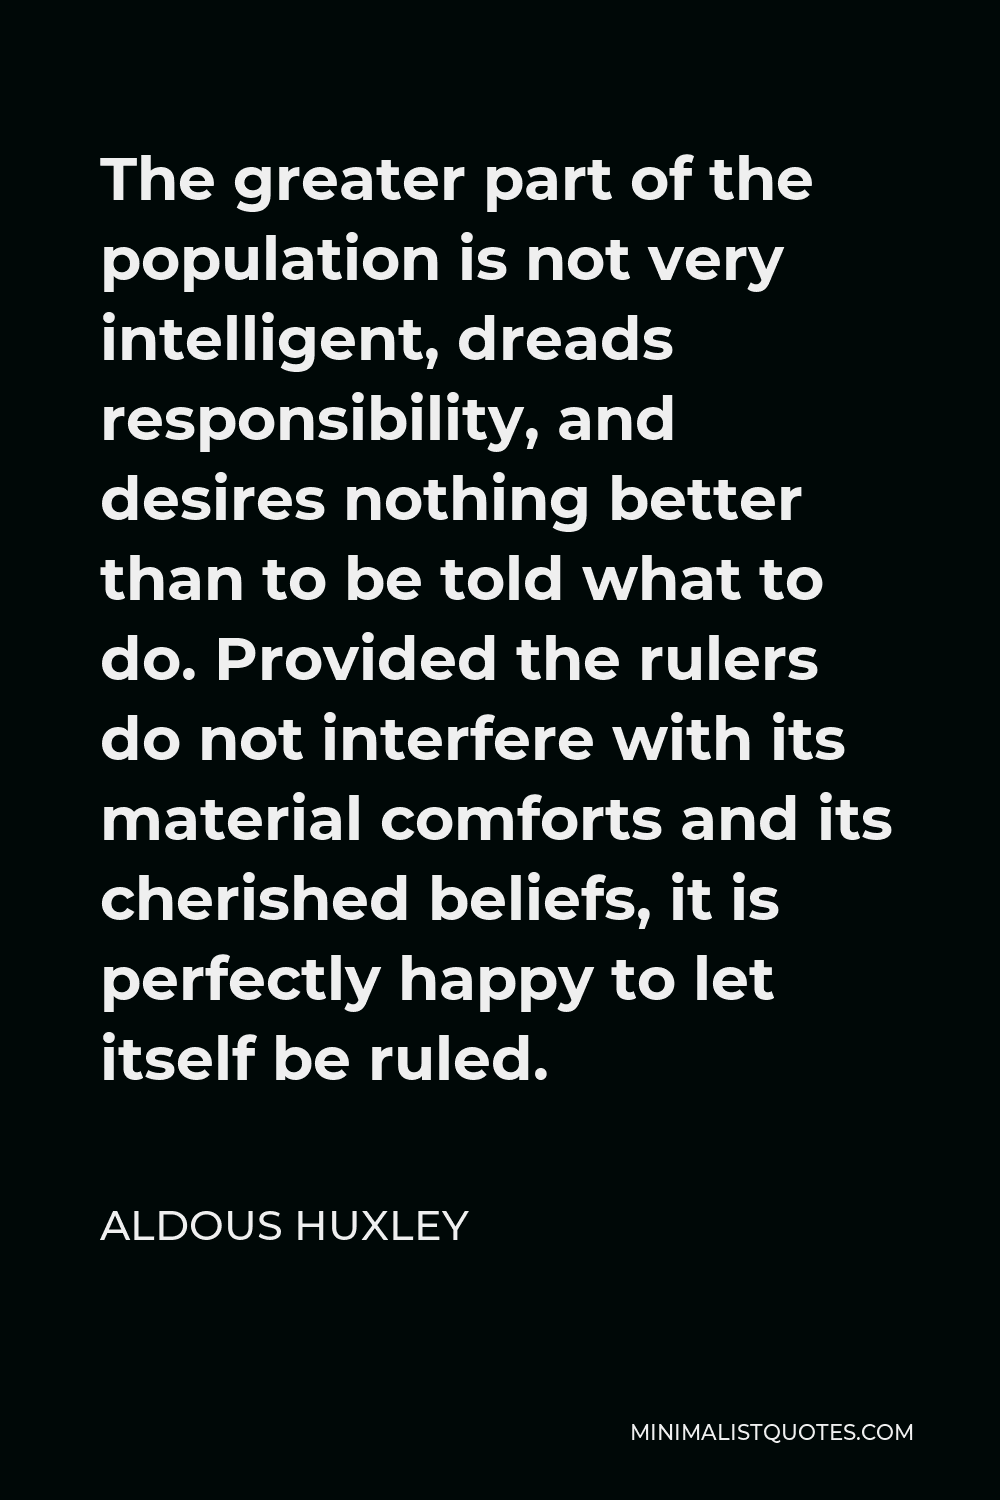 Aldous Huxley Quote - The greater part of the population is not very intelligent, dreads responsibility, and desires nothing better than to be told what to do. Provided the rulers do not interfere with its material comforts and its cherished beliefs, it is perfectly happy to let itself be ruled.